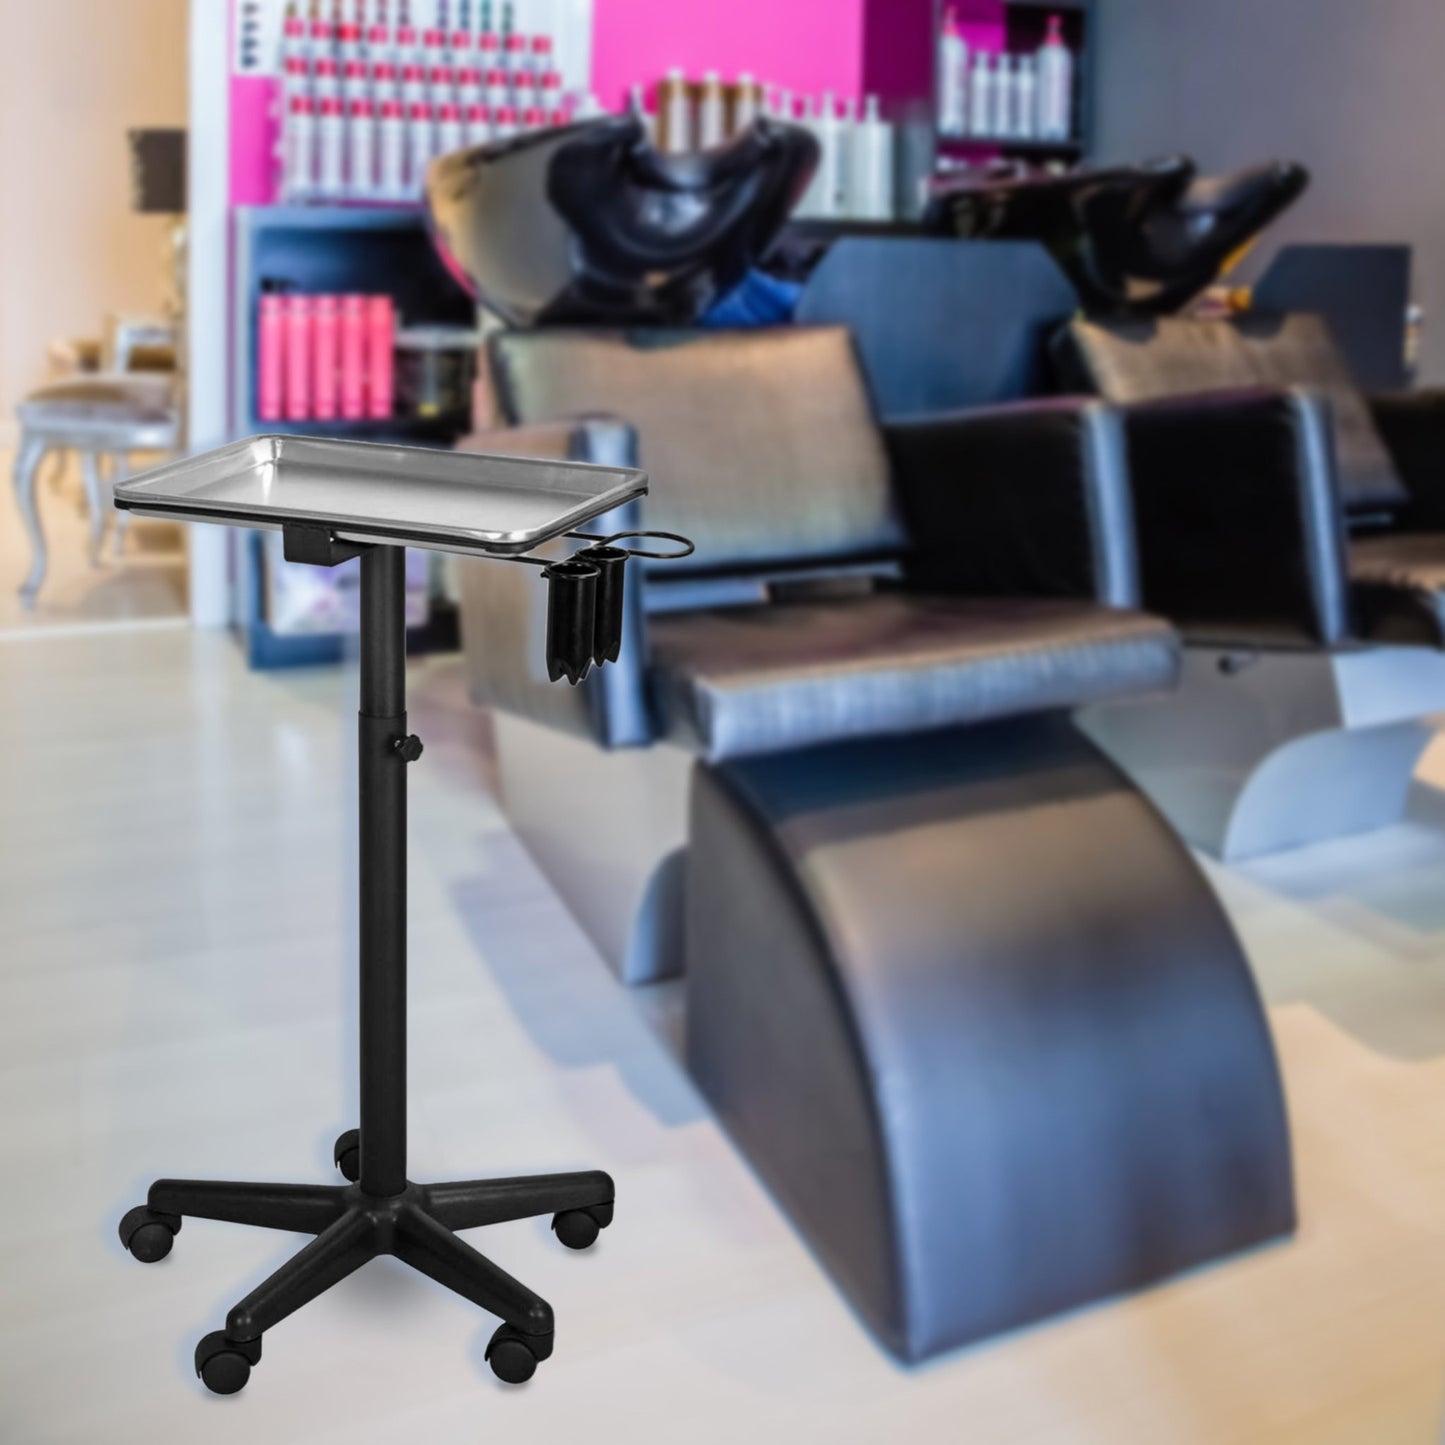 T-011B | Professional Aluminum Salon Rolling Utility Tray | Barber and Stylist Hair Salon Accessories | HOTLINE BEAUTY - SH Salons